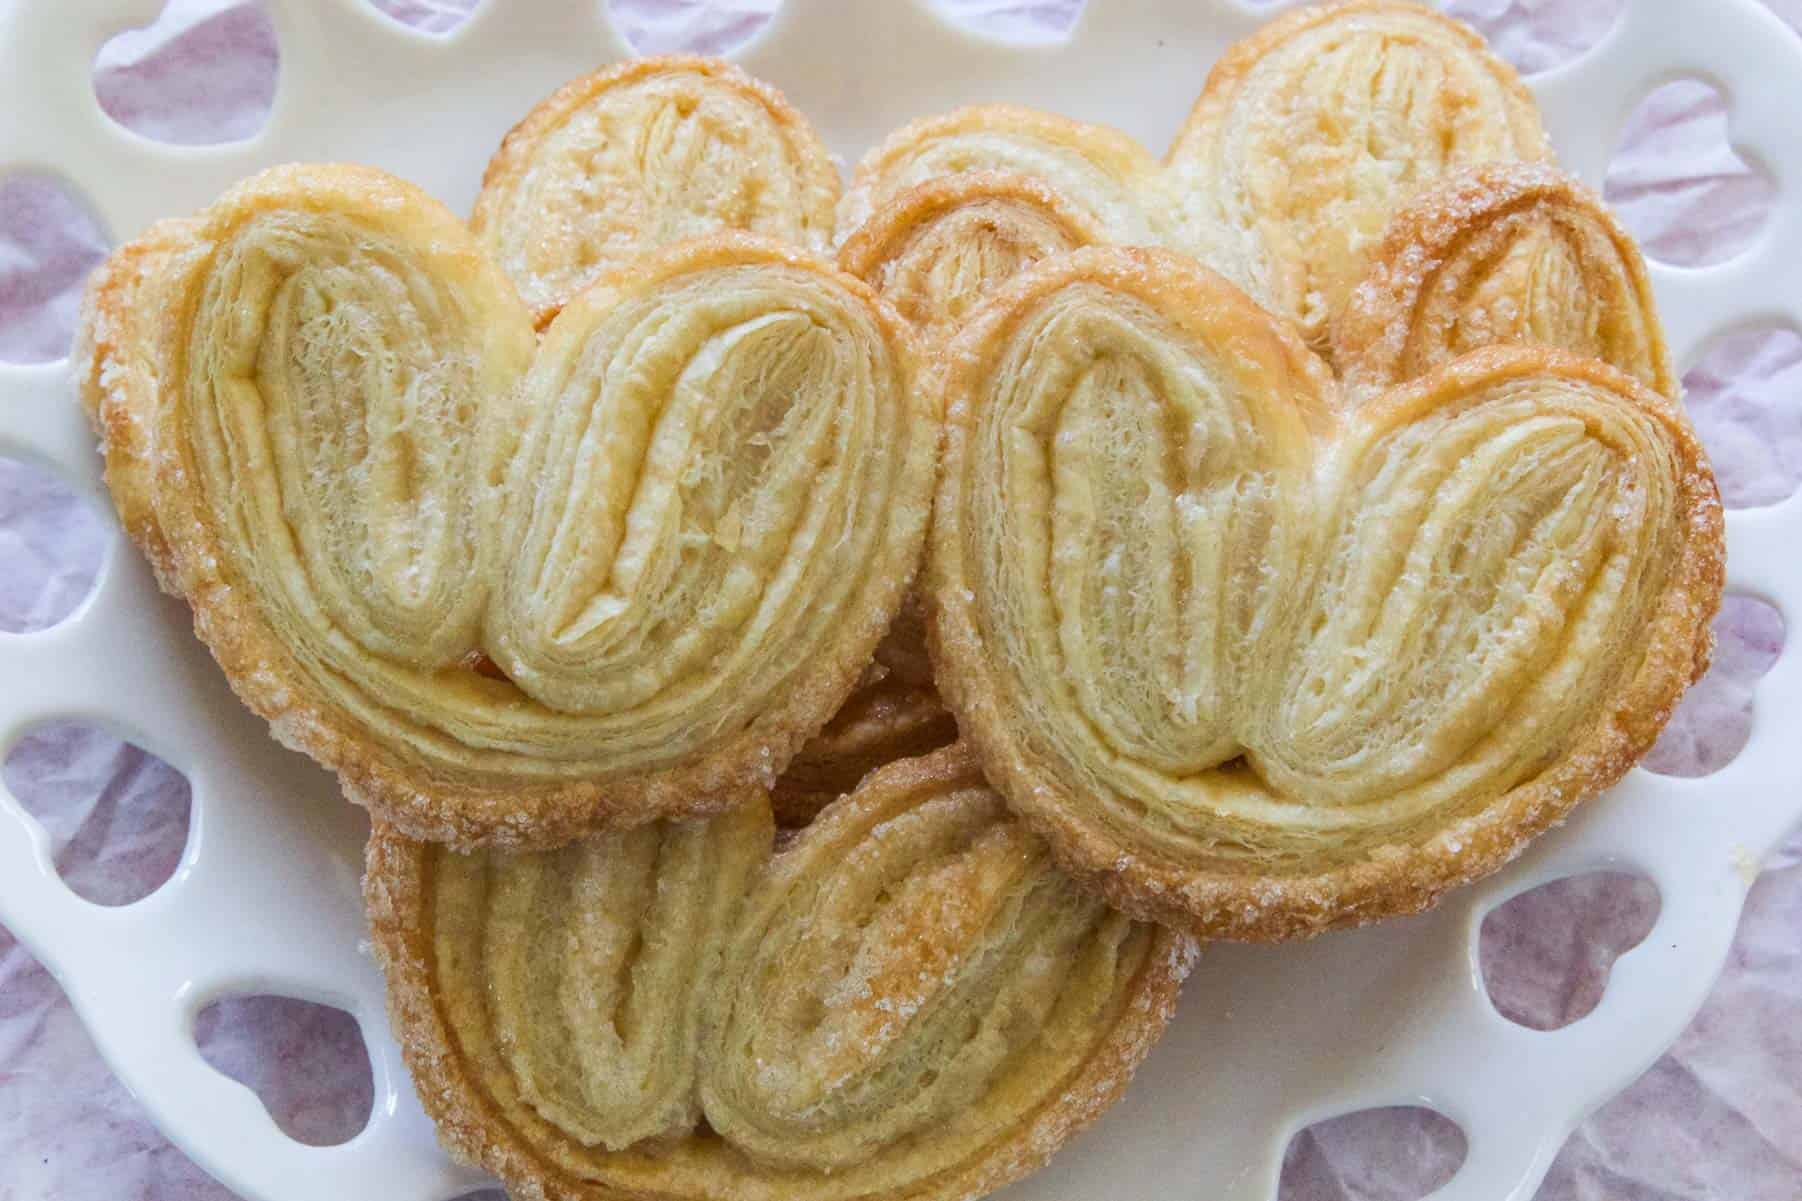 A white plate full of palmiers ready to eat as dessert.